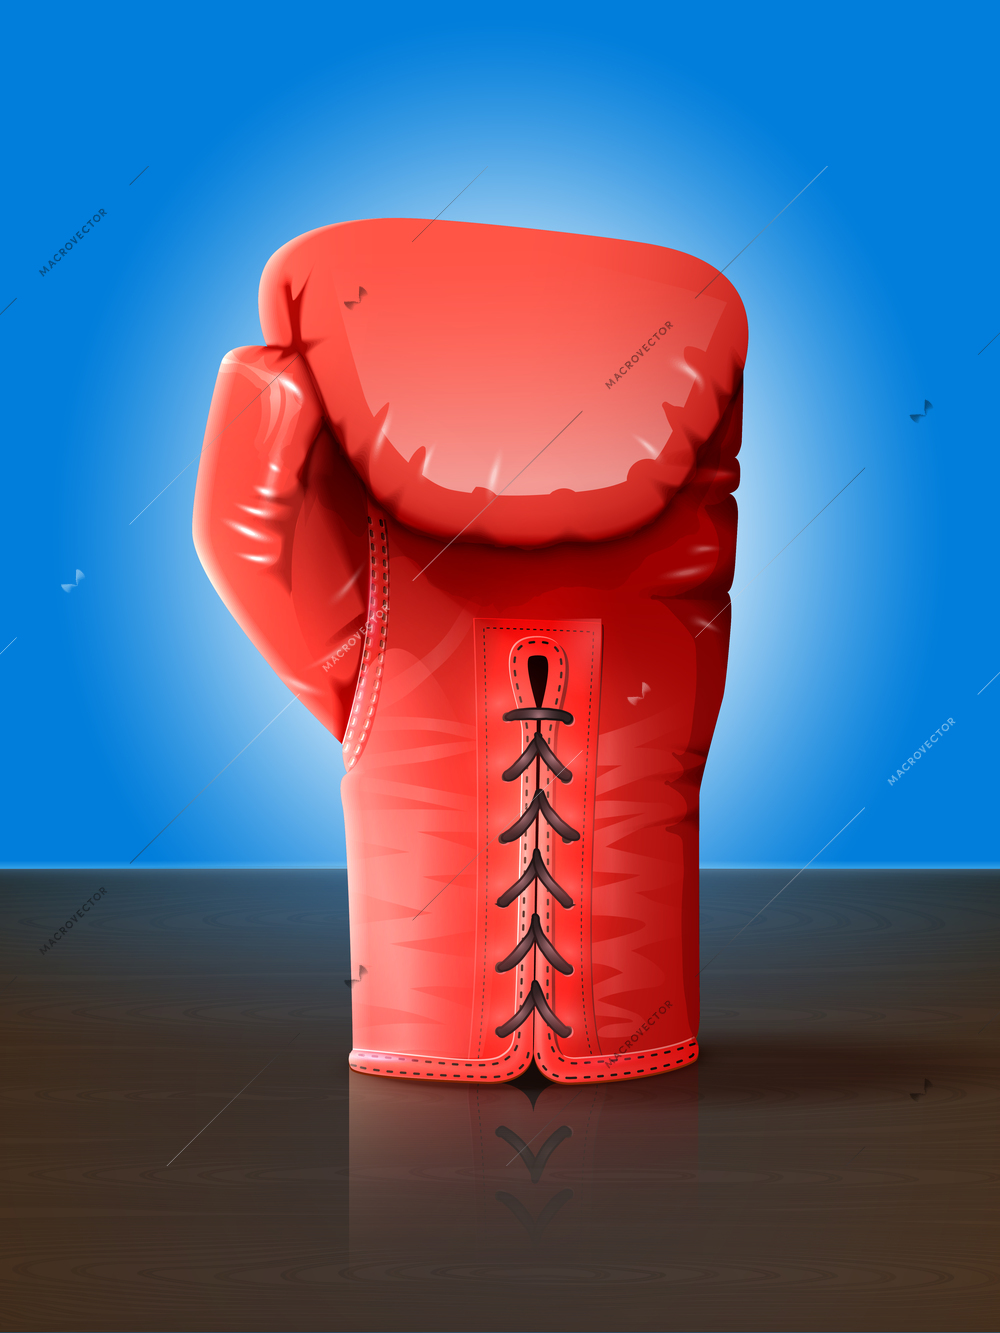 Realistic red leather boxing glove on wooden table vector illustration